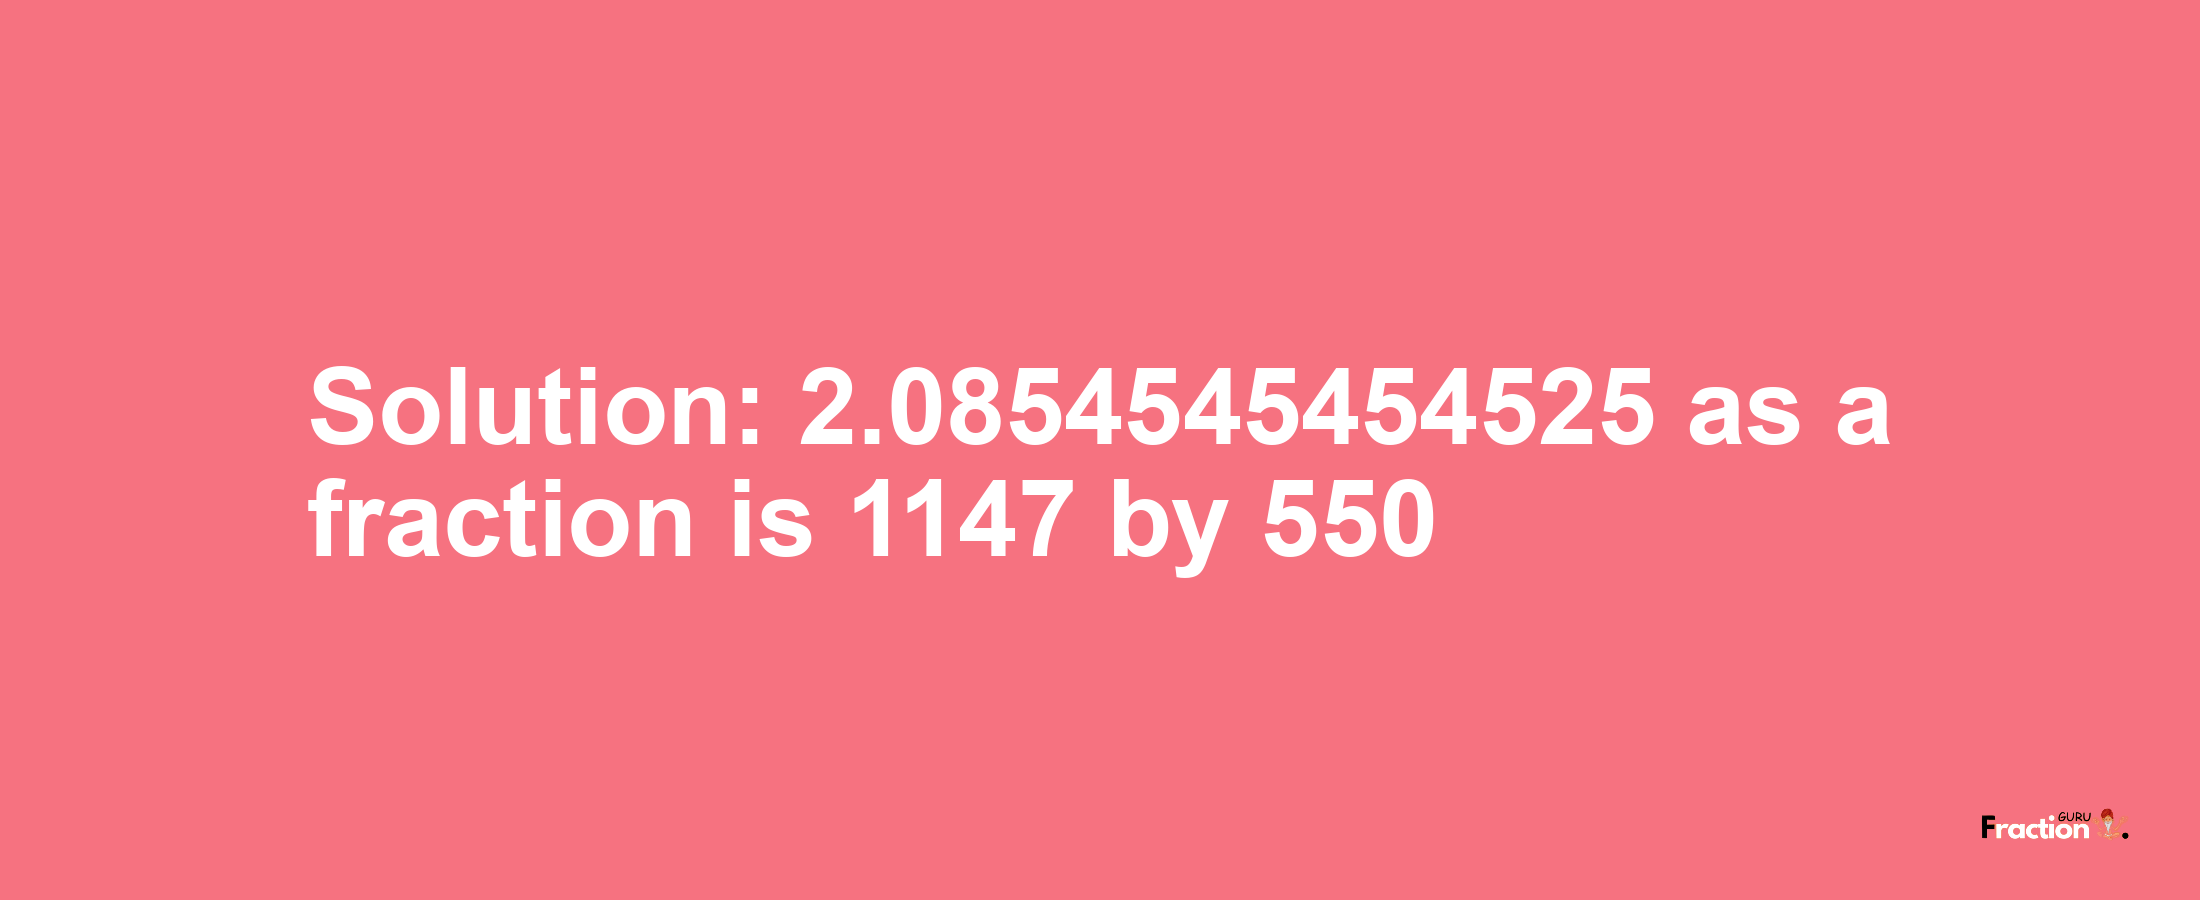 Solution:2.0854545454525 as a fraction is 1147/550